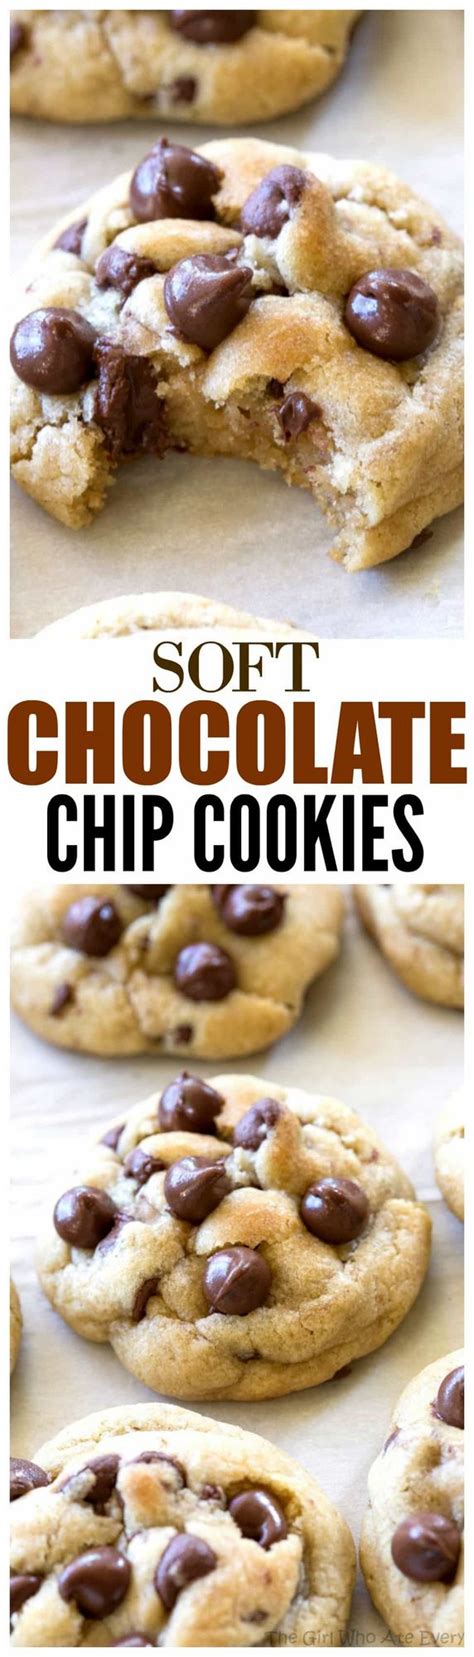 Malted milk powder tenderizes the cookies, while boosting the lactose content of the dough, so they brown more flavorfully in the oven. Soft Chocolate Chip Cookies | The Girl Who Ate Everything ...